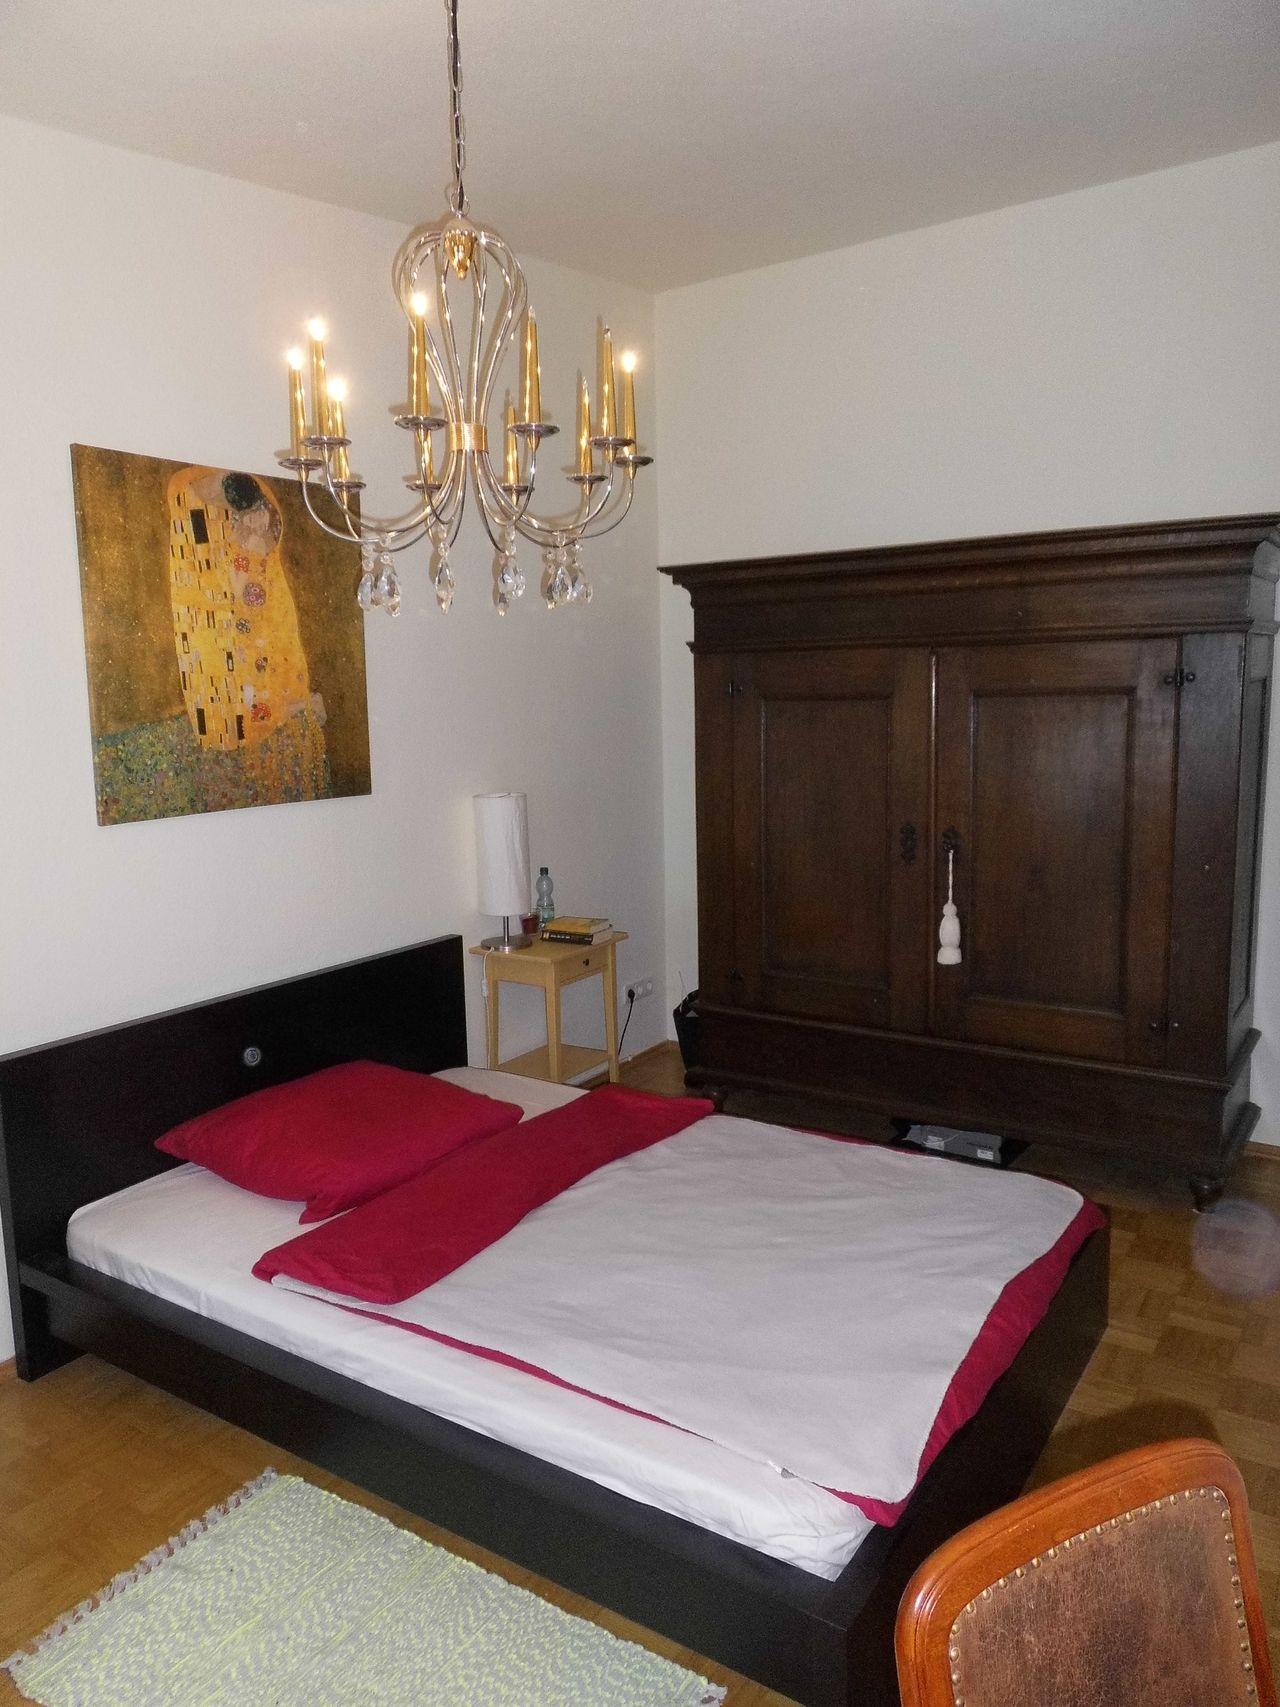 Top apartment in absolute prime location in the center of Leipzig: in 10 minutes walk through the Clara Park in the city center (WE16)